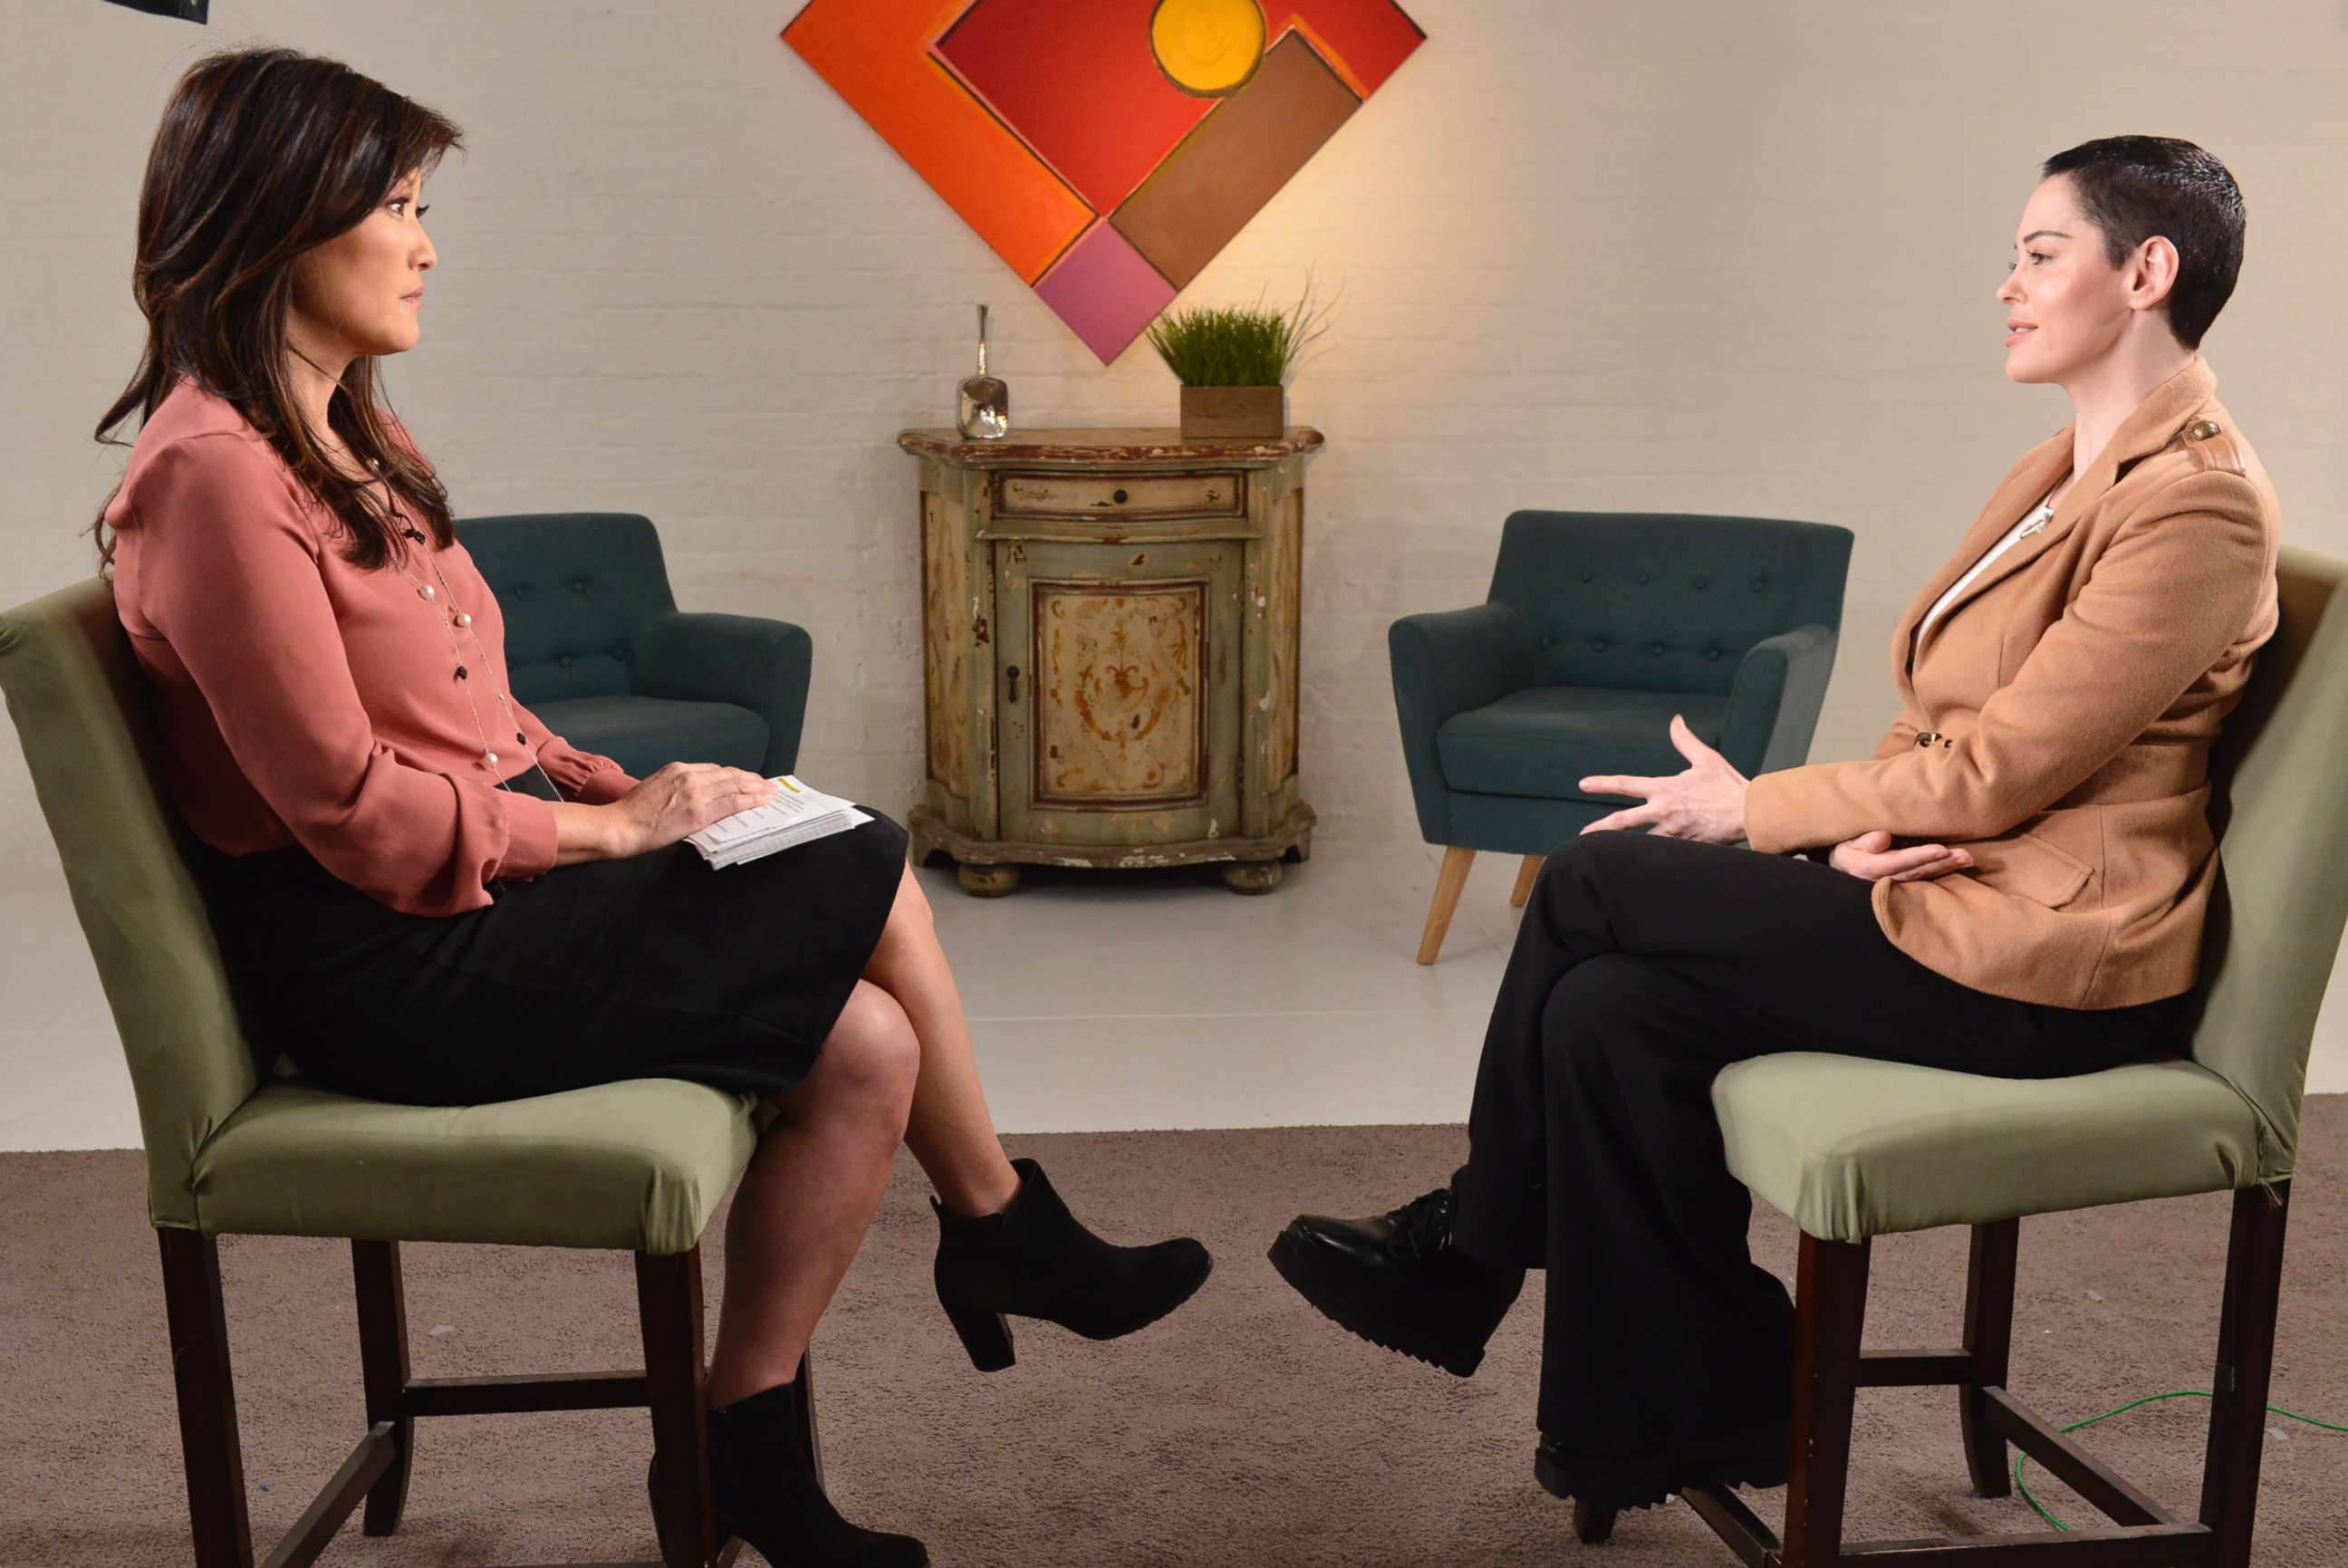 PHOTO:ABC News "Nightline" co-anchor Juju Chang sat down for an extensive interview with Rose McGowan about her new book "Brave" and McGowan's allegations that Harvey Weinstein raped her.